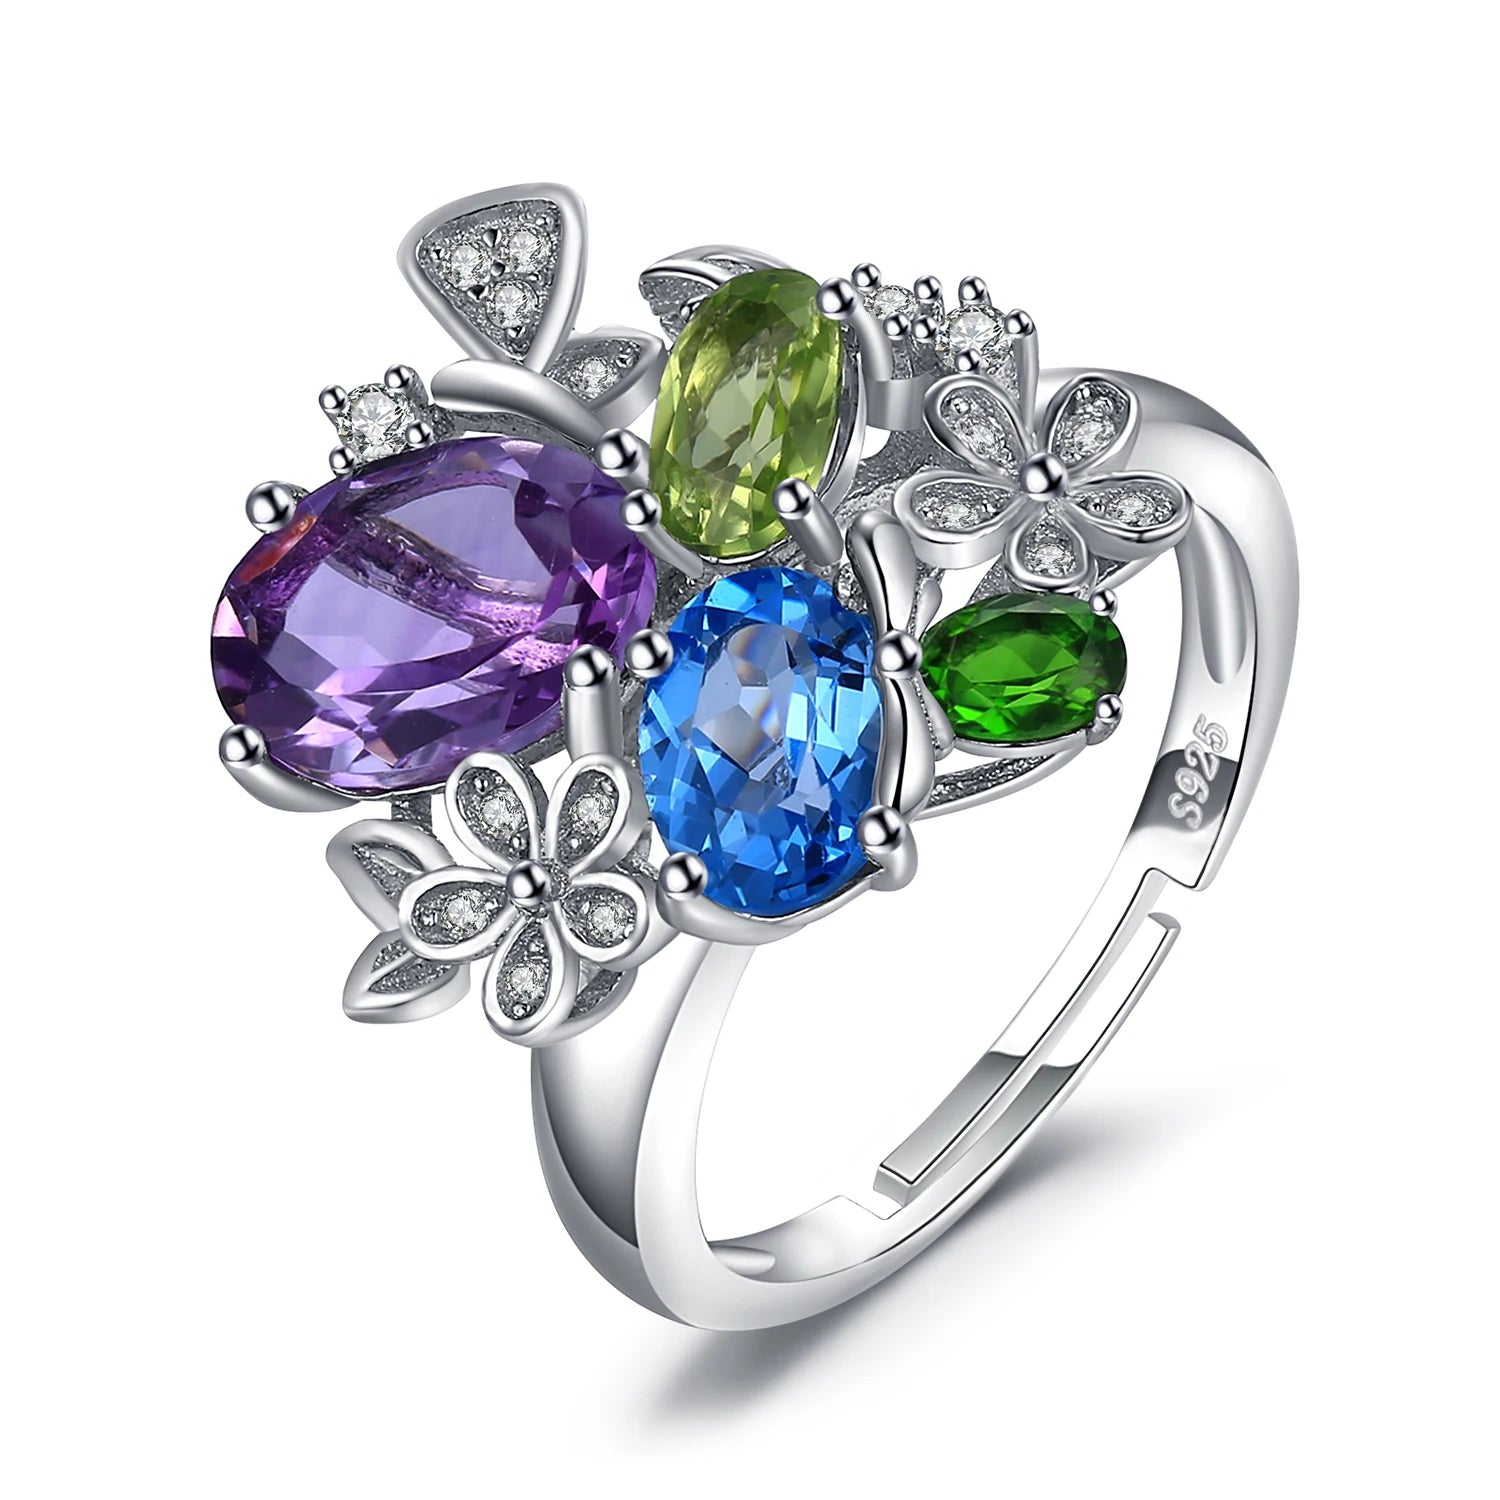 JewelryPalace Flower Natural Amethyst Blue Topaz Peridot Chrome Diopside Open Adjustable Cocktail Ring 925 Sterling Silver Women 925 Sterling Silver resizable